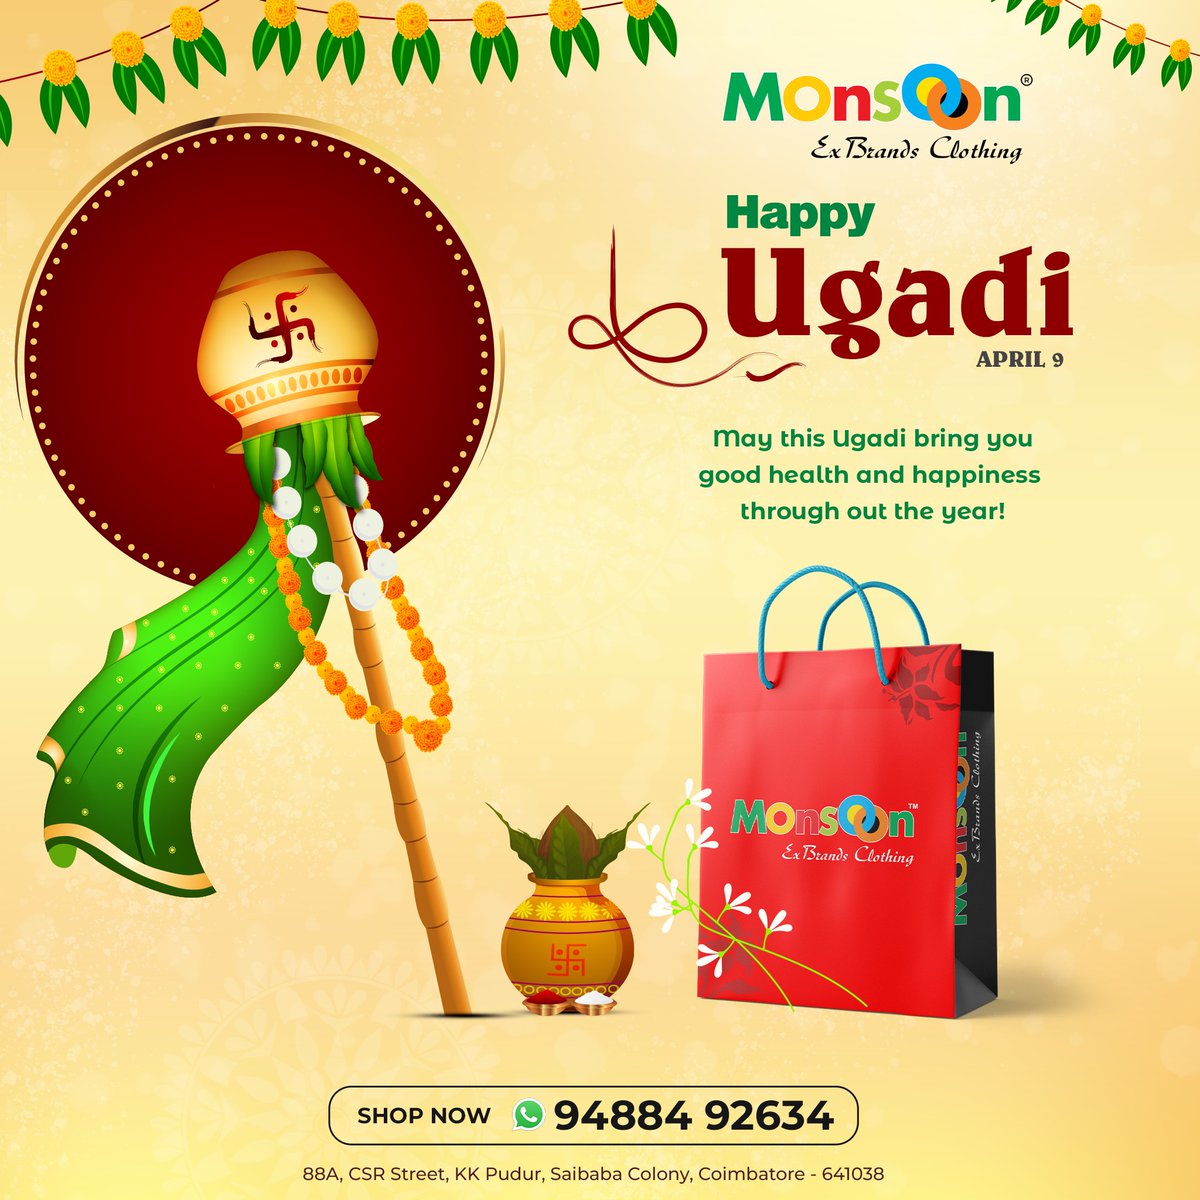 As we embark on this new journey, may you find happiness and fulfillment
in every step you take. Happy Ugadi!

#ugadi #festival #newyear #ugadifestival #happyugadi #lord #MonsoonExbrandsClothing #clothings #FashionSale #TopBrands #ShopNow #DontMissOut #Coimbatore